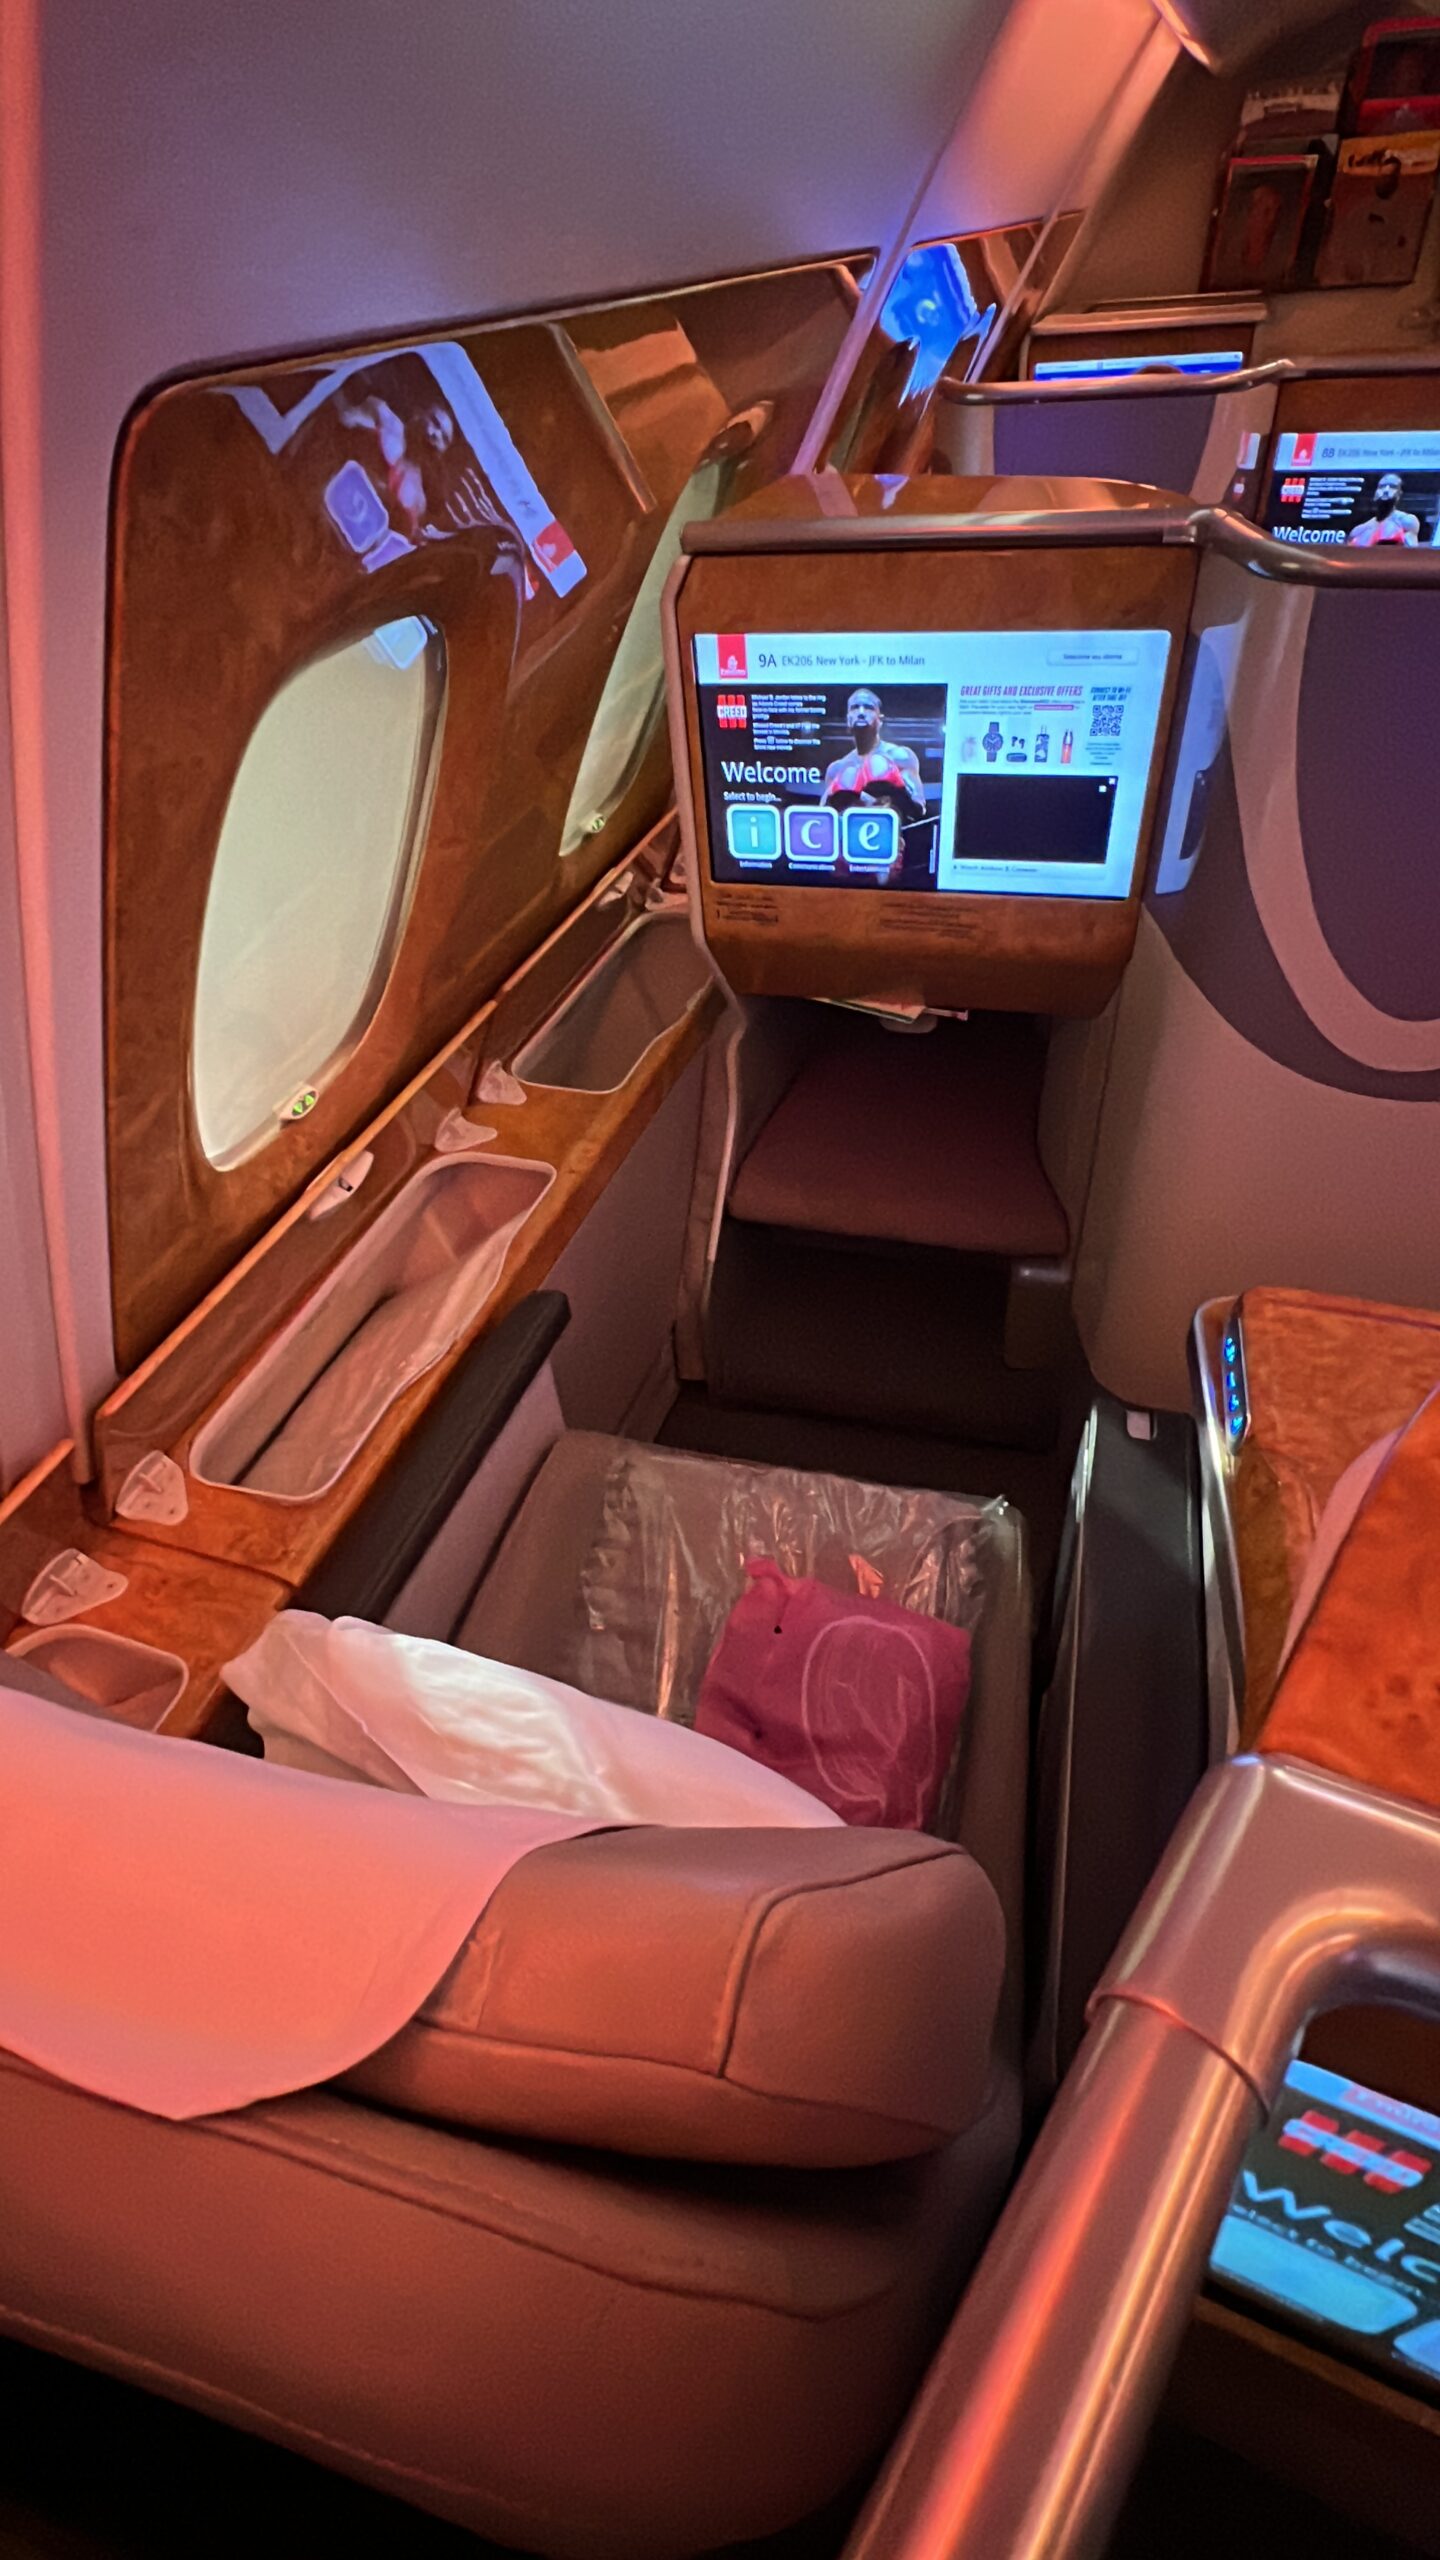 Emirates A380 Business Class seat